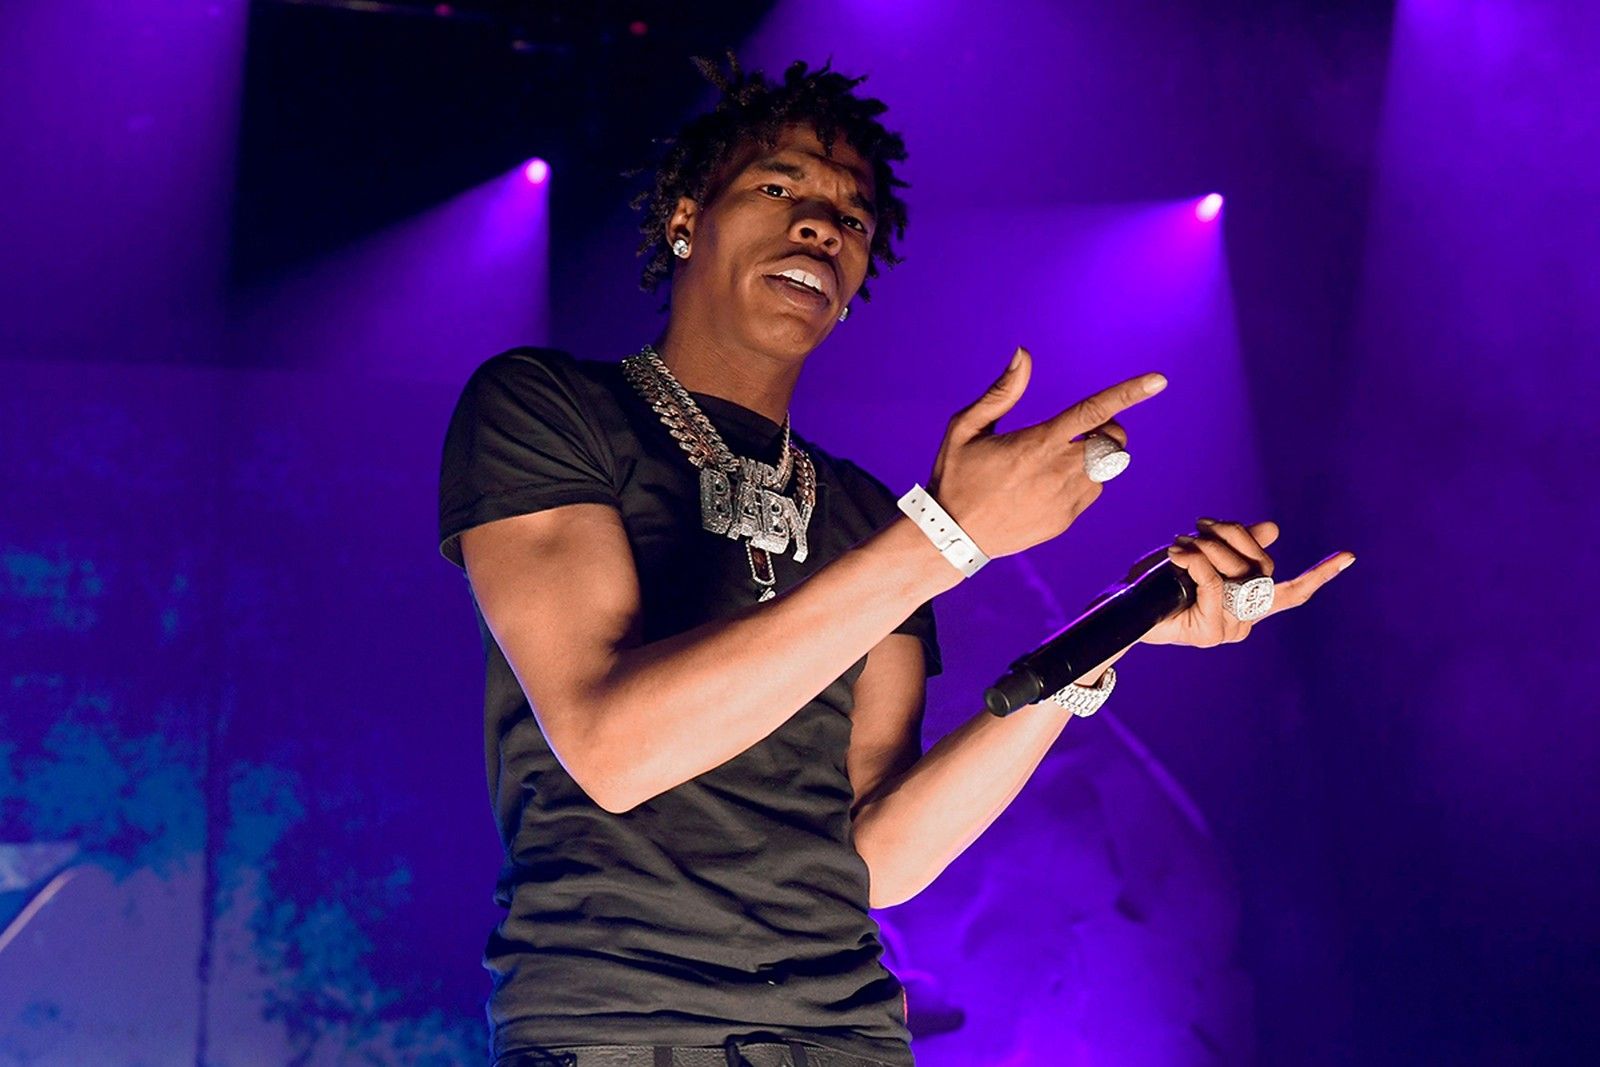 Lil Baby Drops 'My Turn' Deluxe Edition: Stream Here